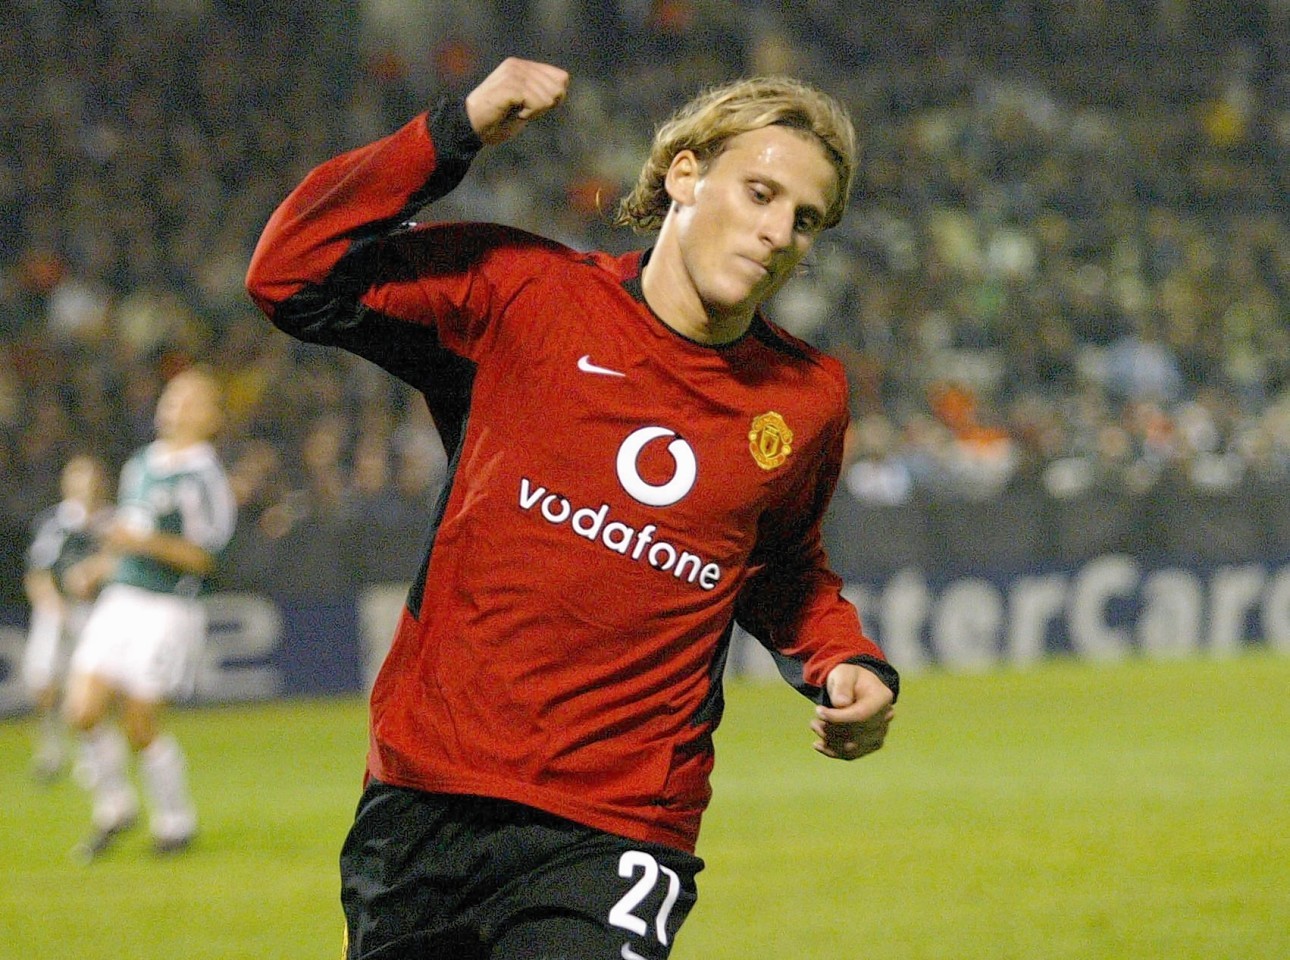 Diego Forlan's last spell in the Premier League saw him wearing the red of Manchester United